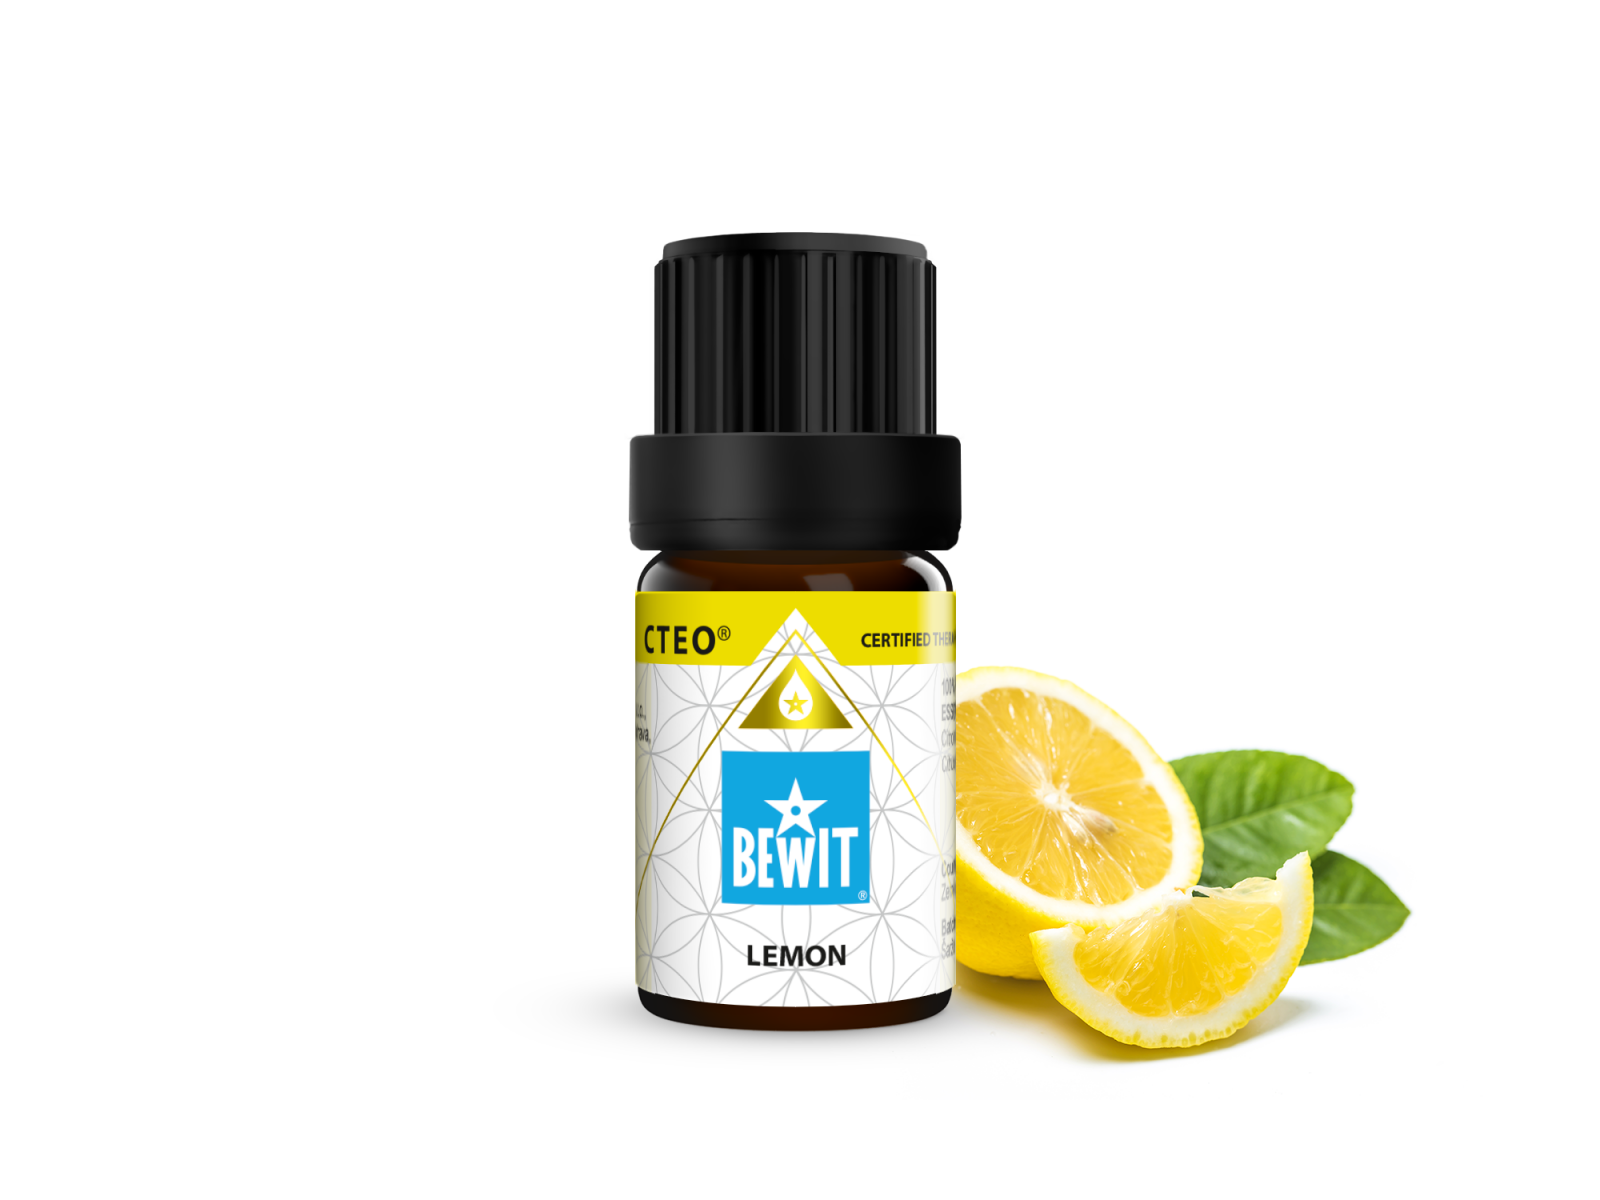 BEWIT Lemon - 100% pure and natural CTEO® essential oil - 3